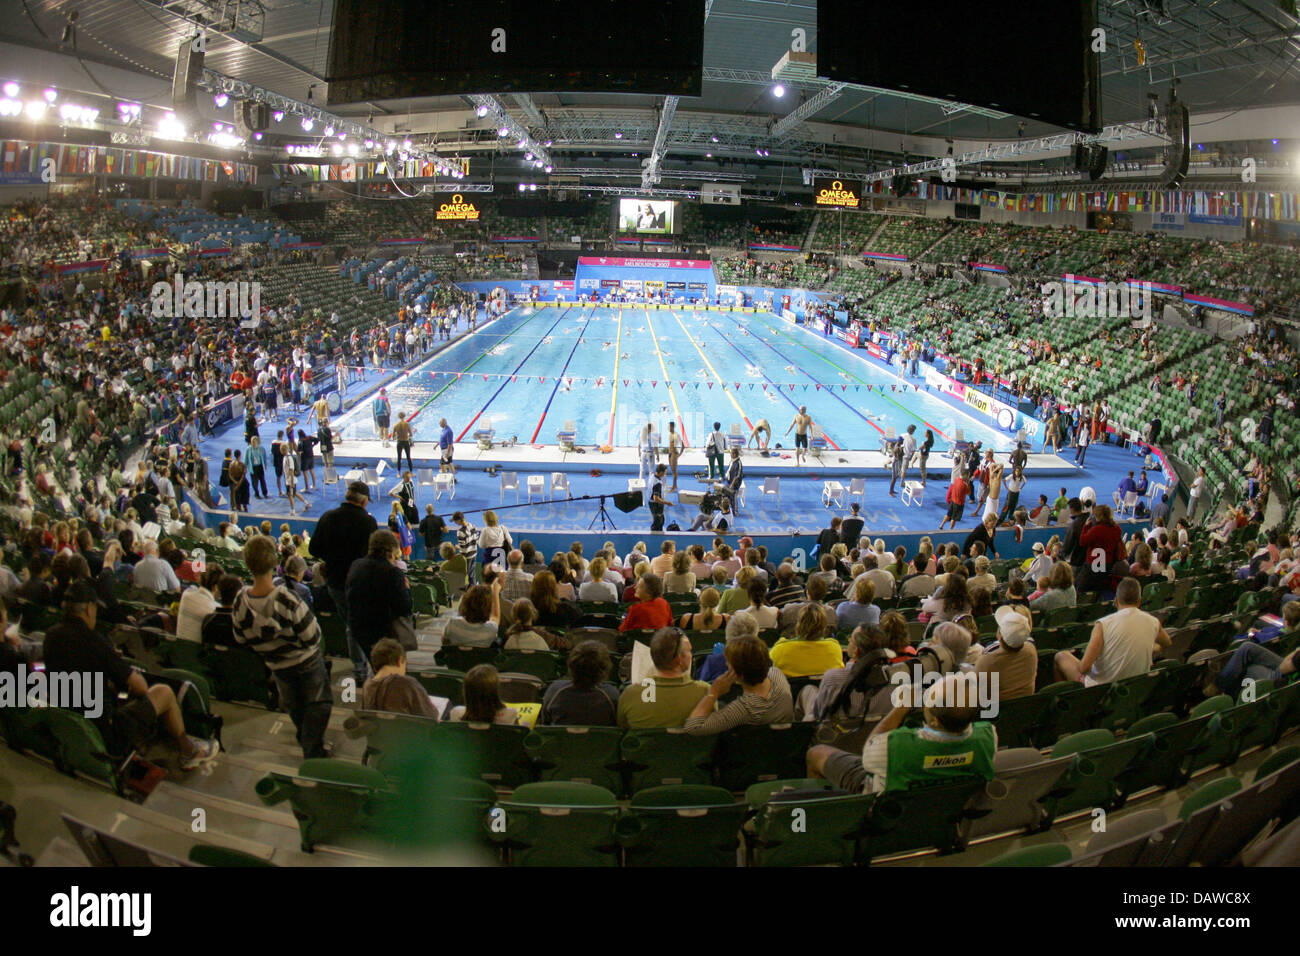 Spectators watch the 12th FINA World Championships at the Rod Laver Arena of Melbourne, Australia, 25 March 2007